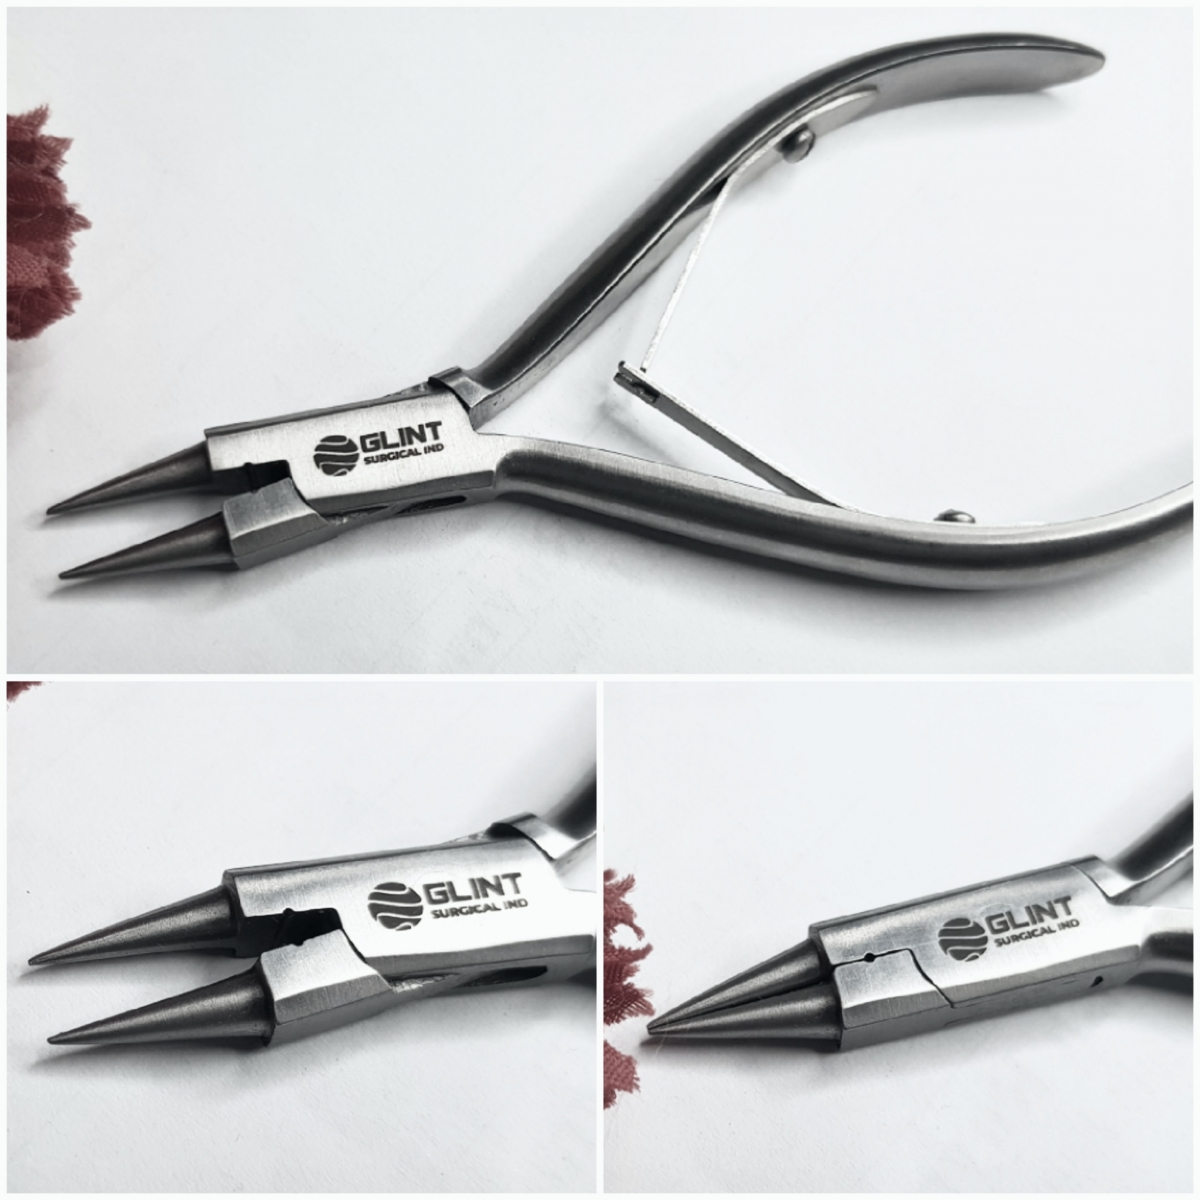 Wire round plier with 0.8mm whole